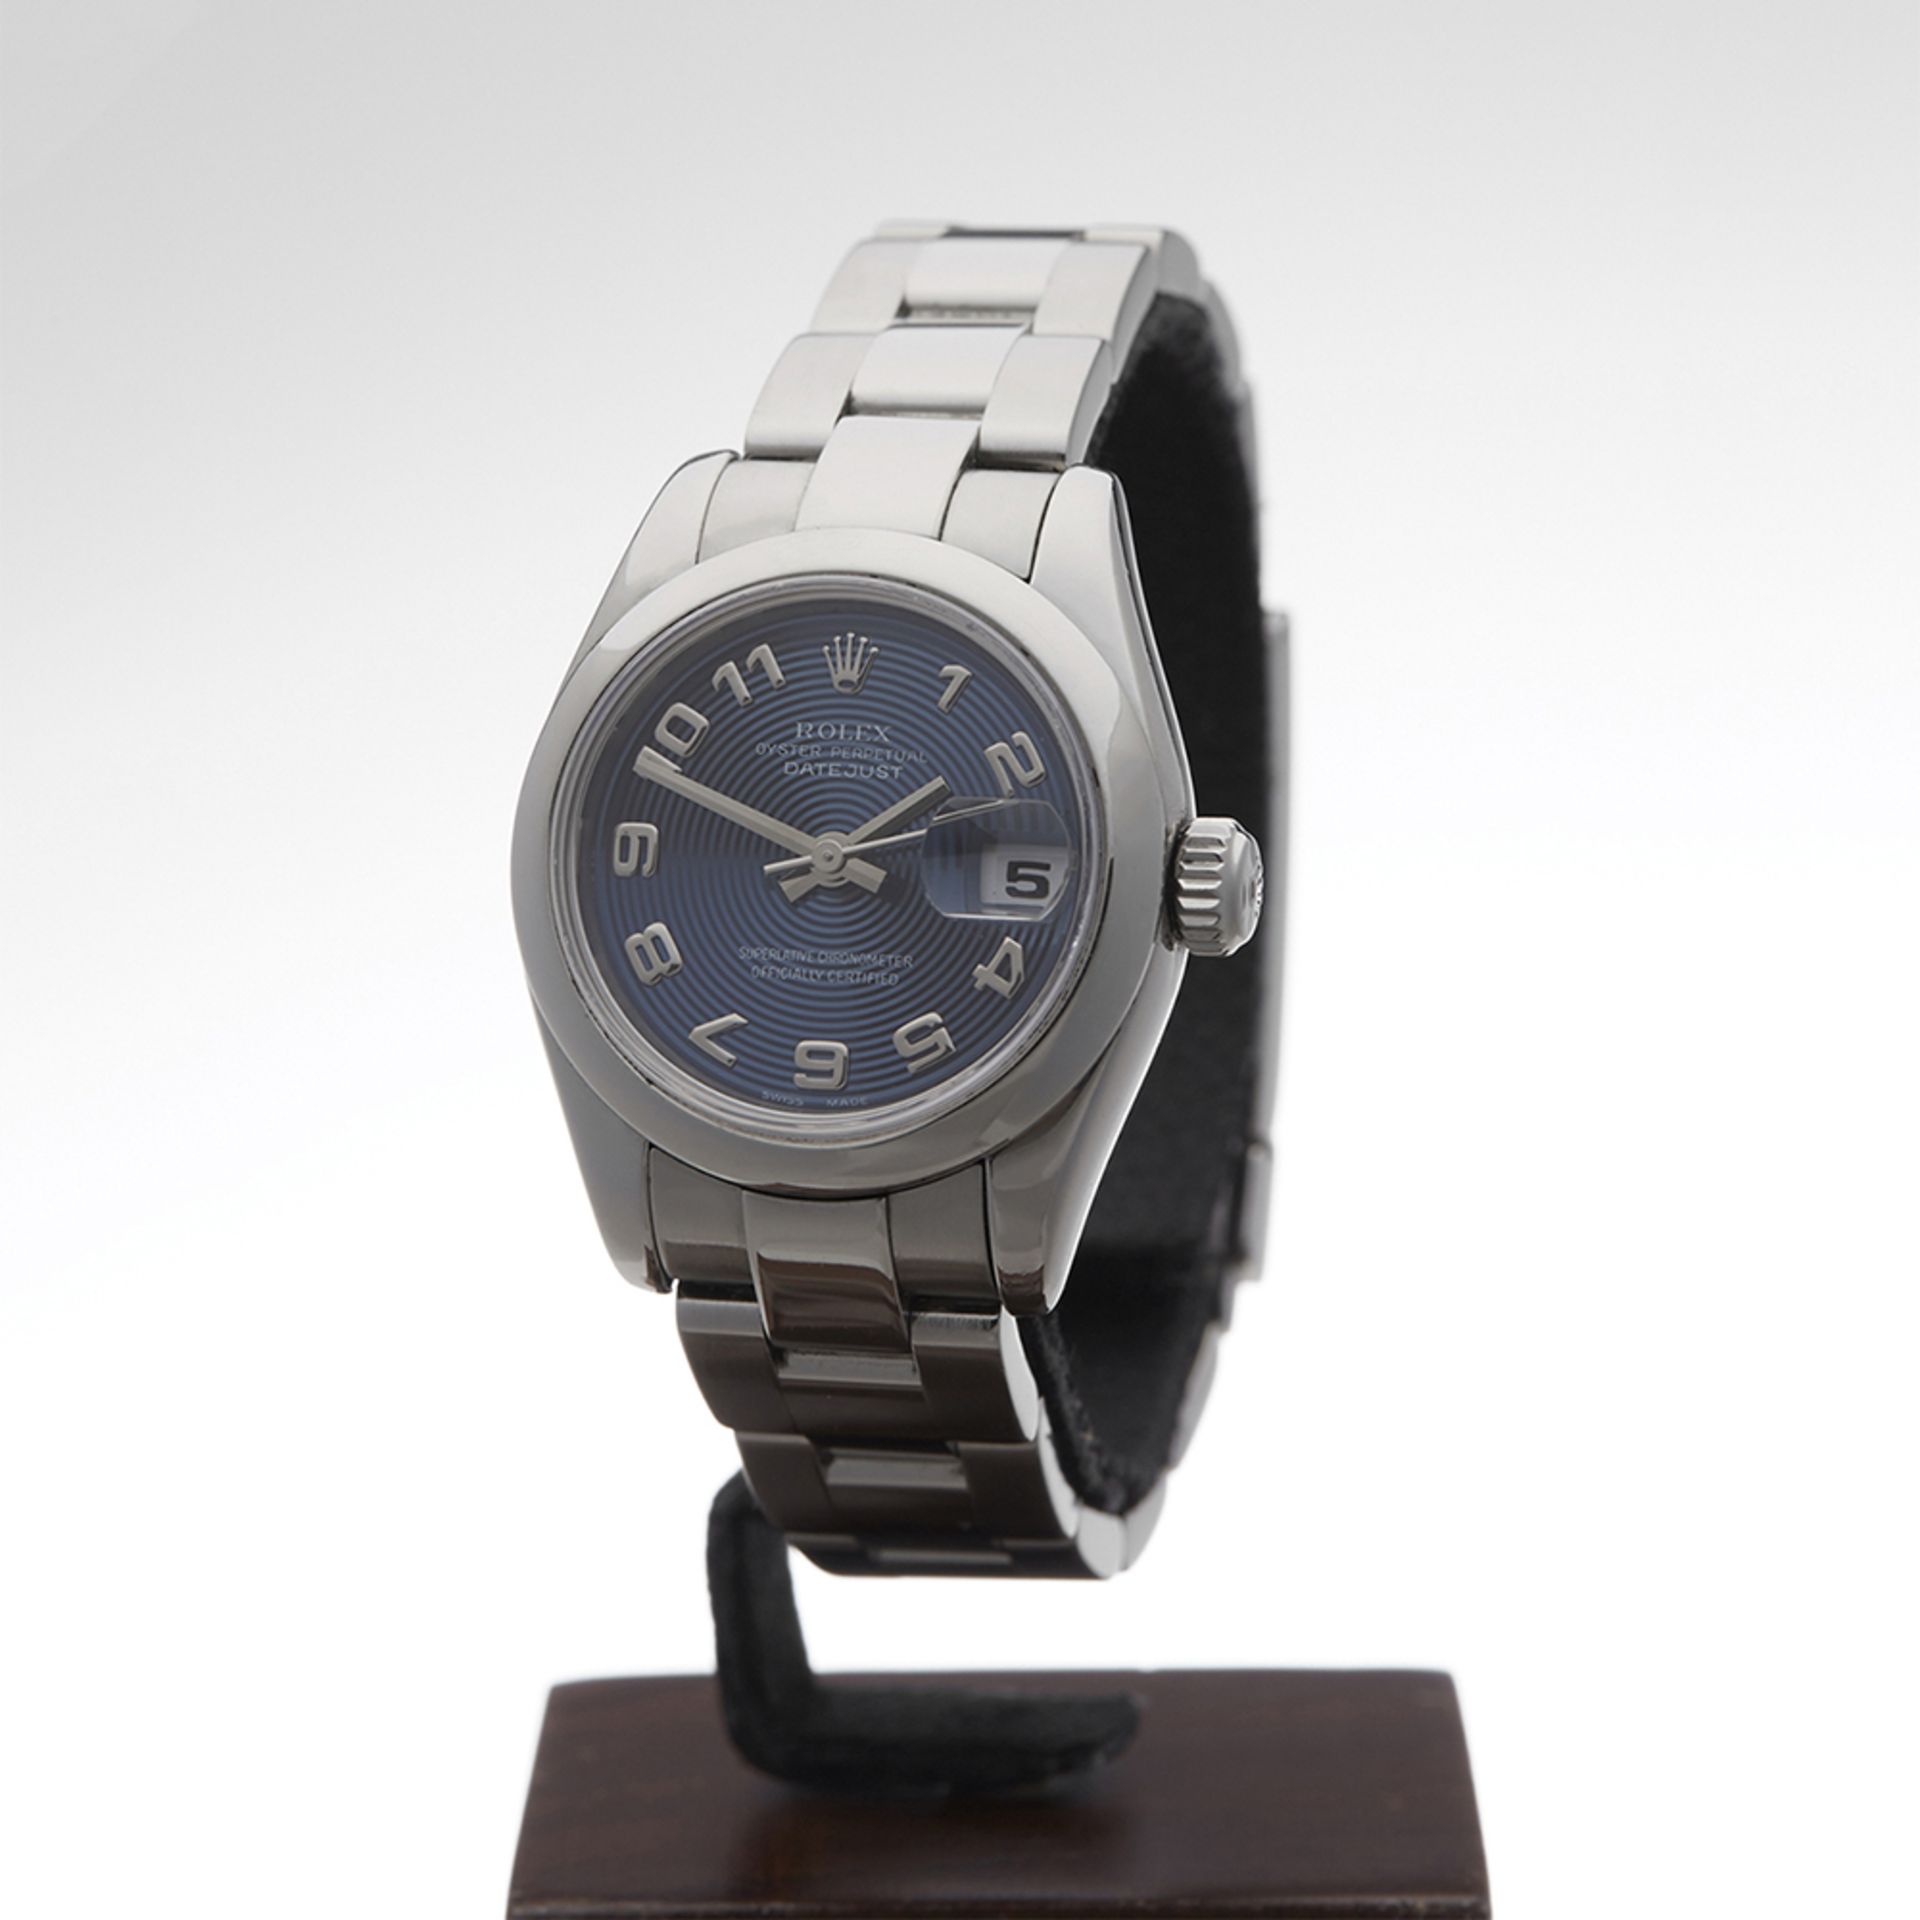 Datejust 26mm Stainless Steel - 179160